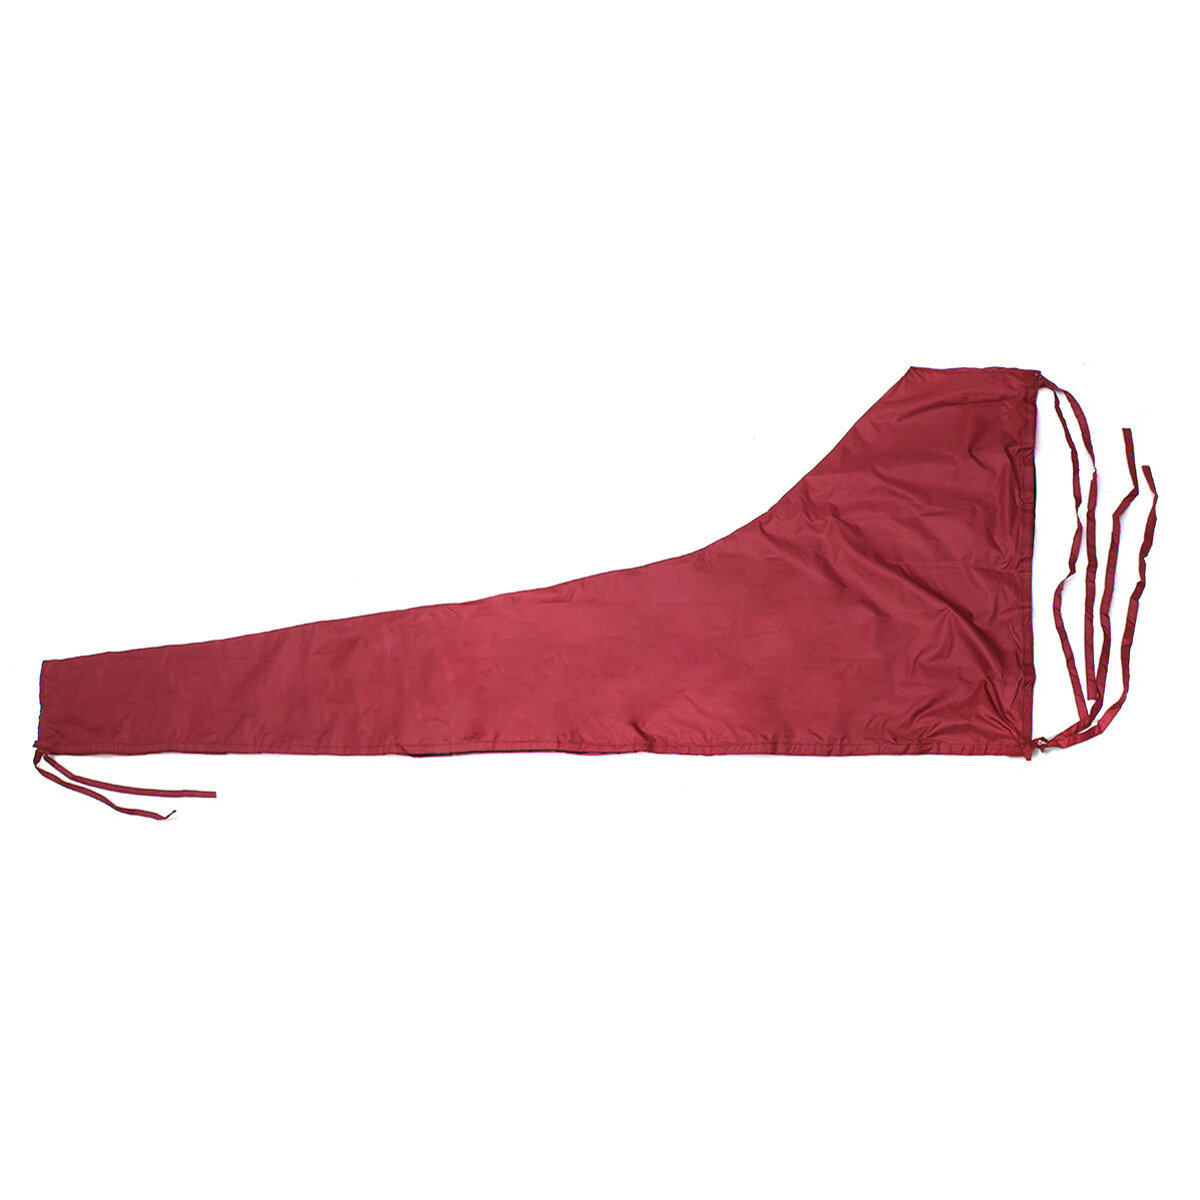 420D 8-9ft /10-11ft Mainsail Boom Sail Cover Protector Waterproof Fabric Red